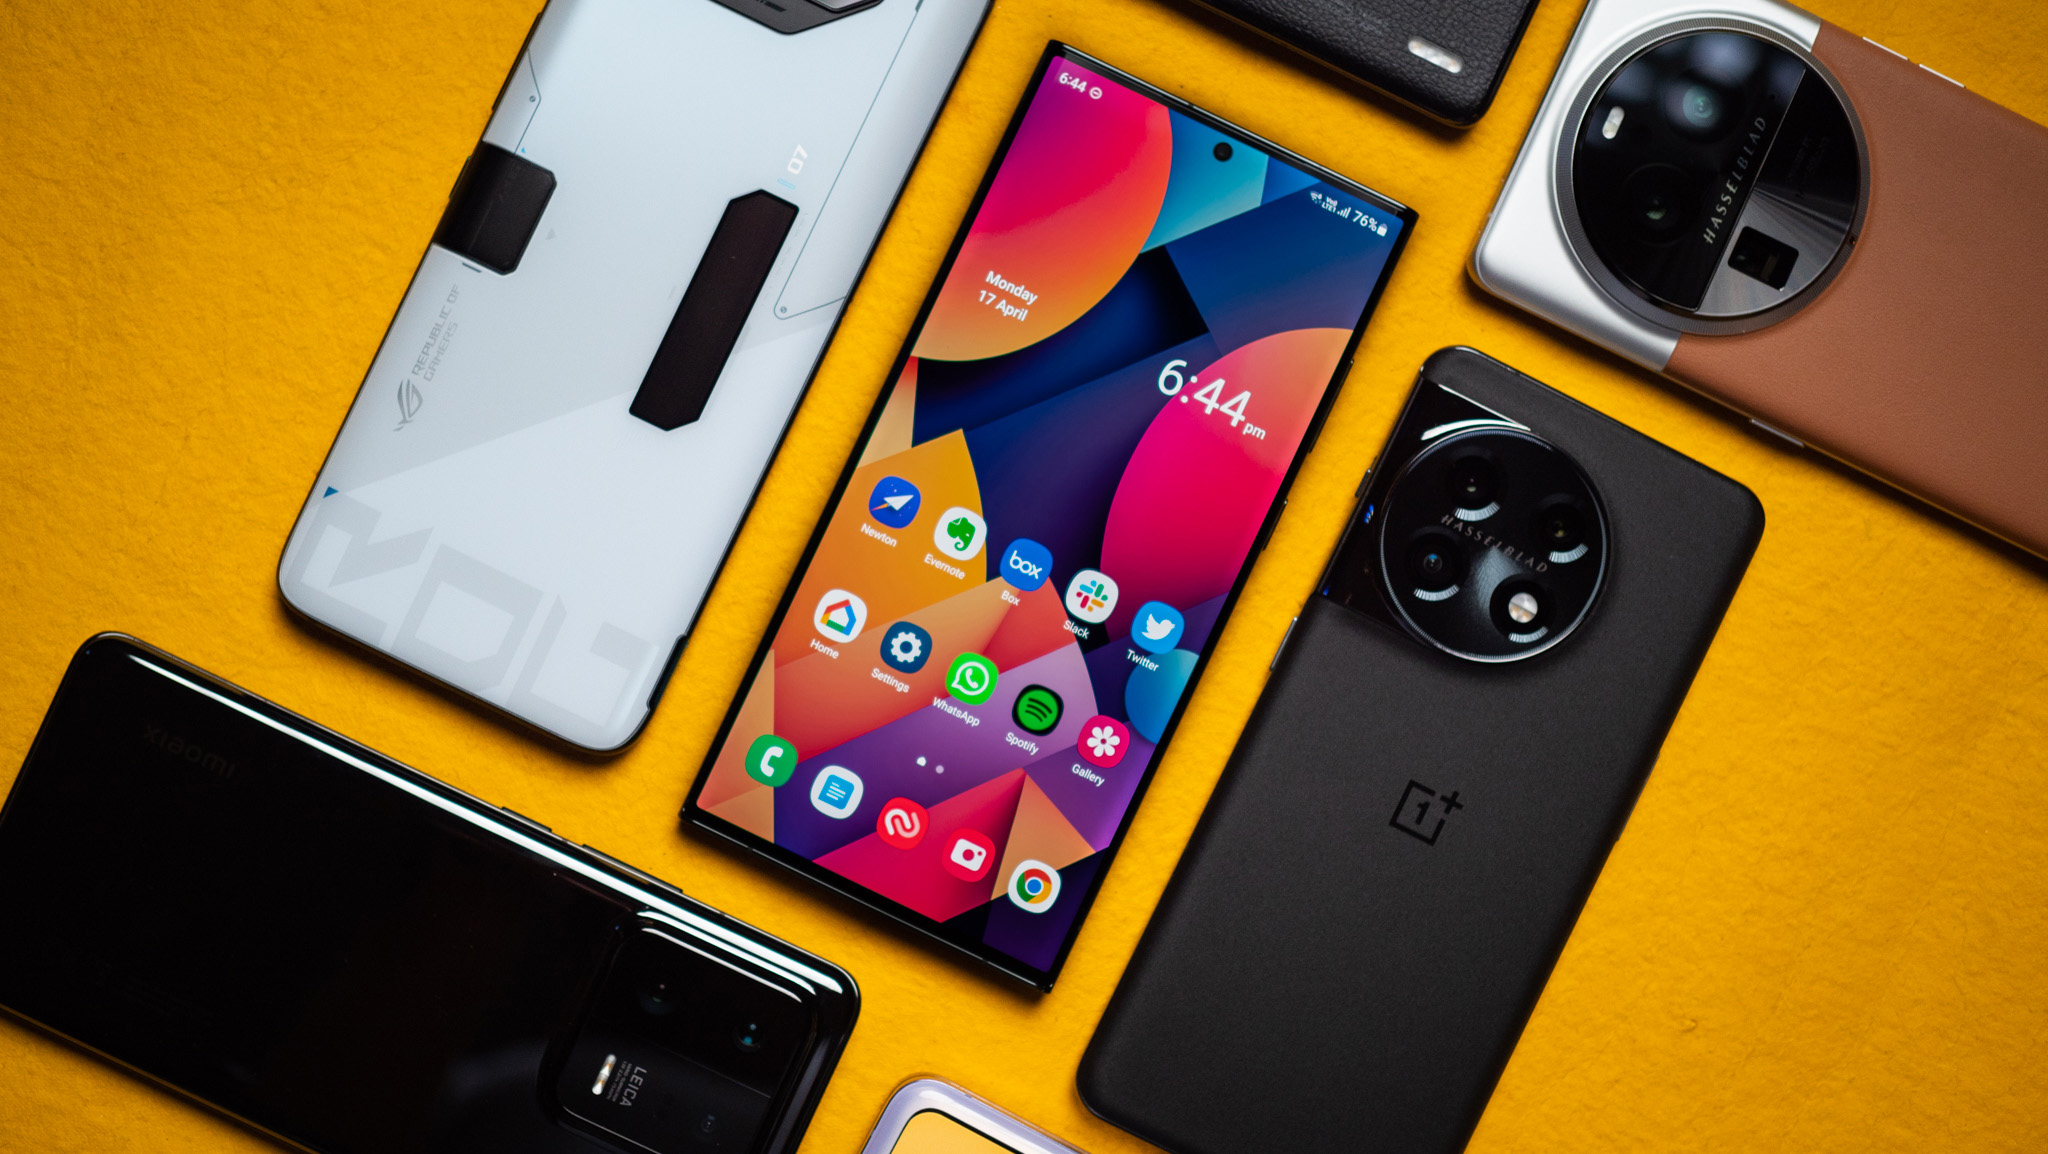 October Prime Day has ended, but these leftover phone deals are